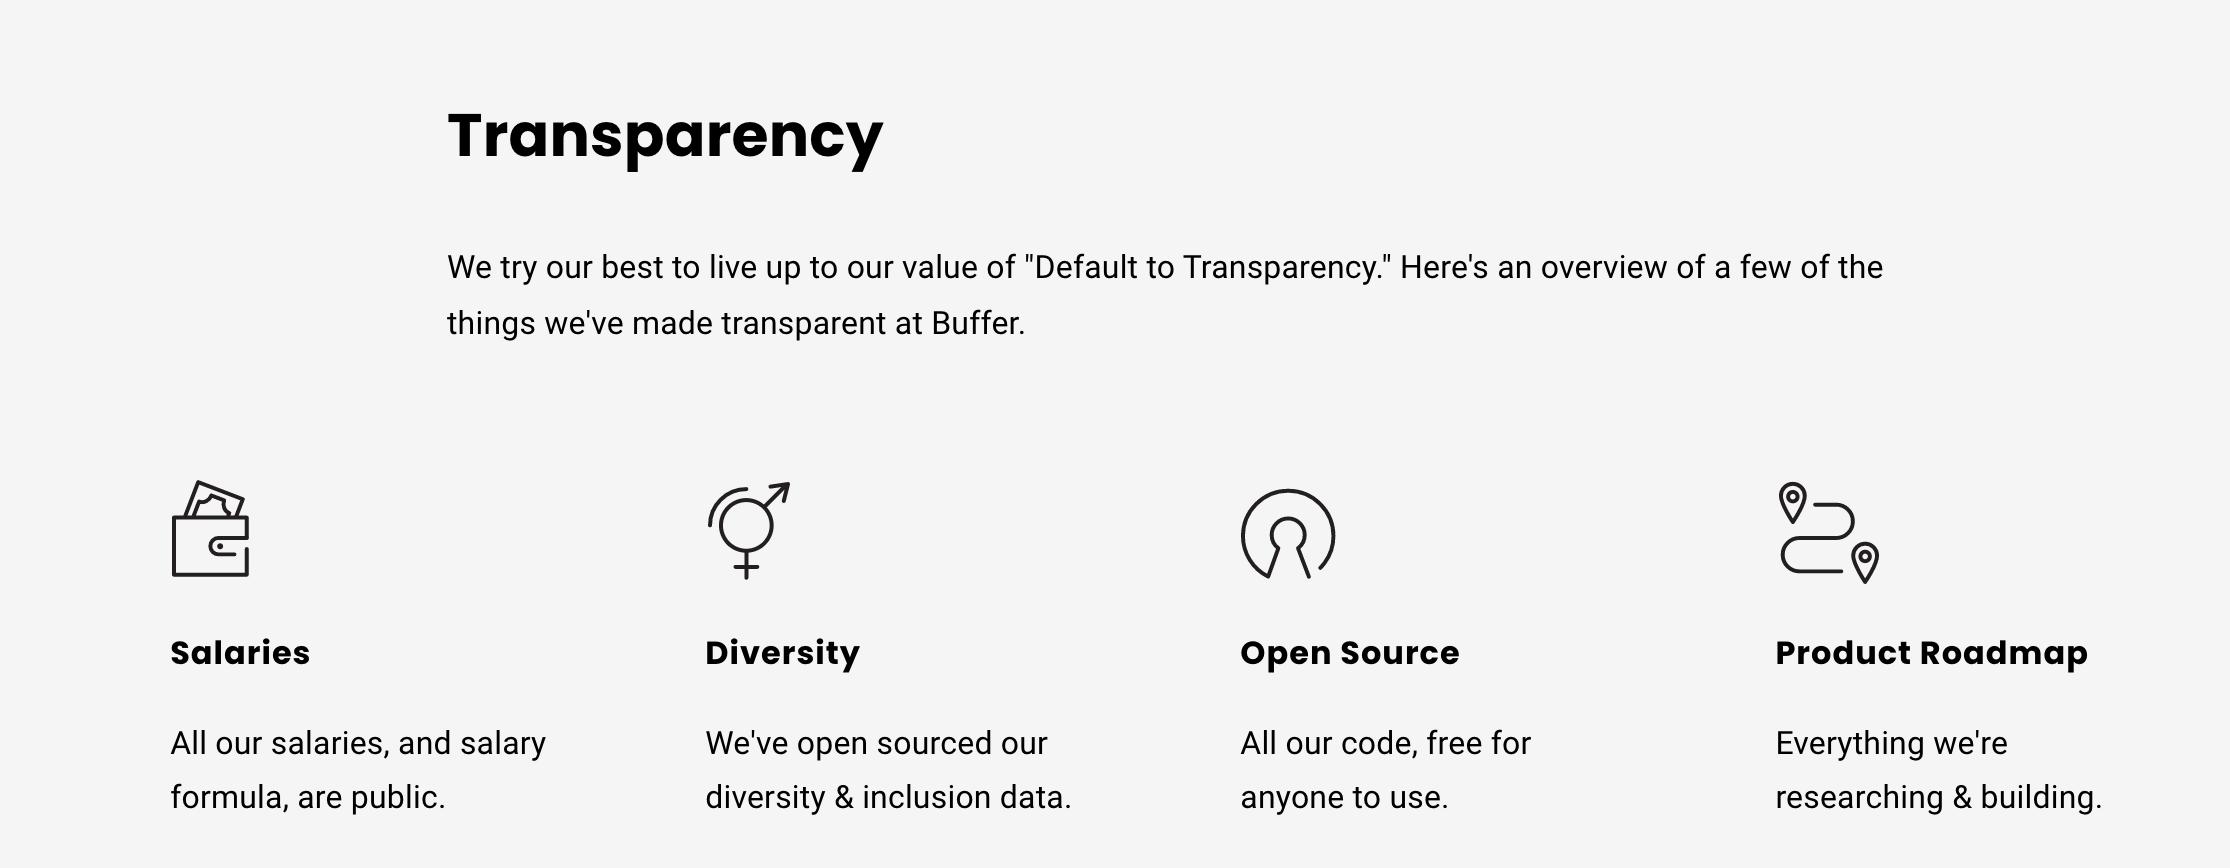 Transparency is a core value Buffer uses to deliver the best customer service experience